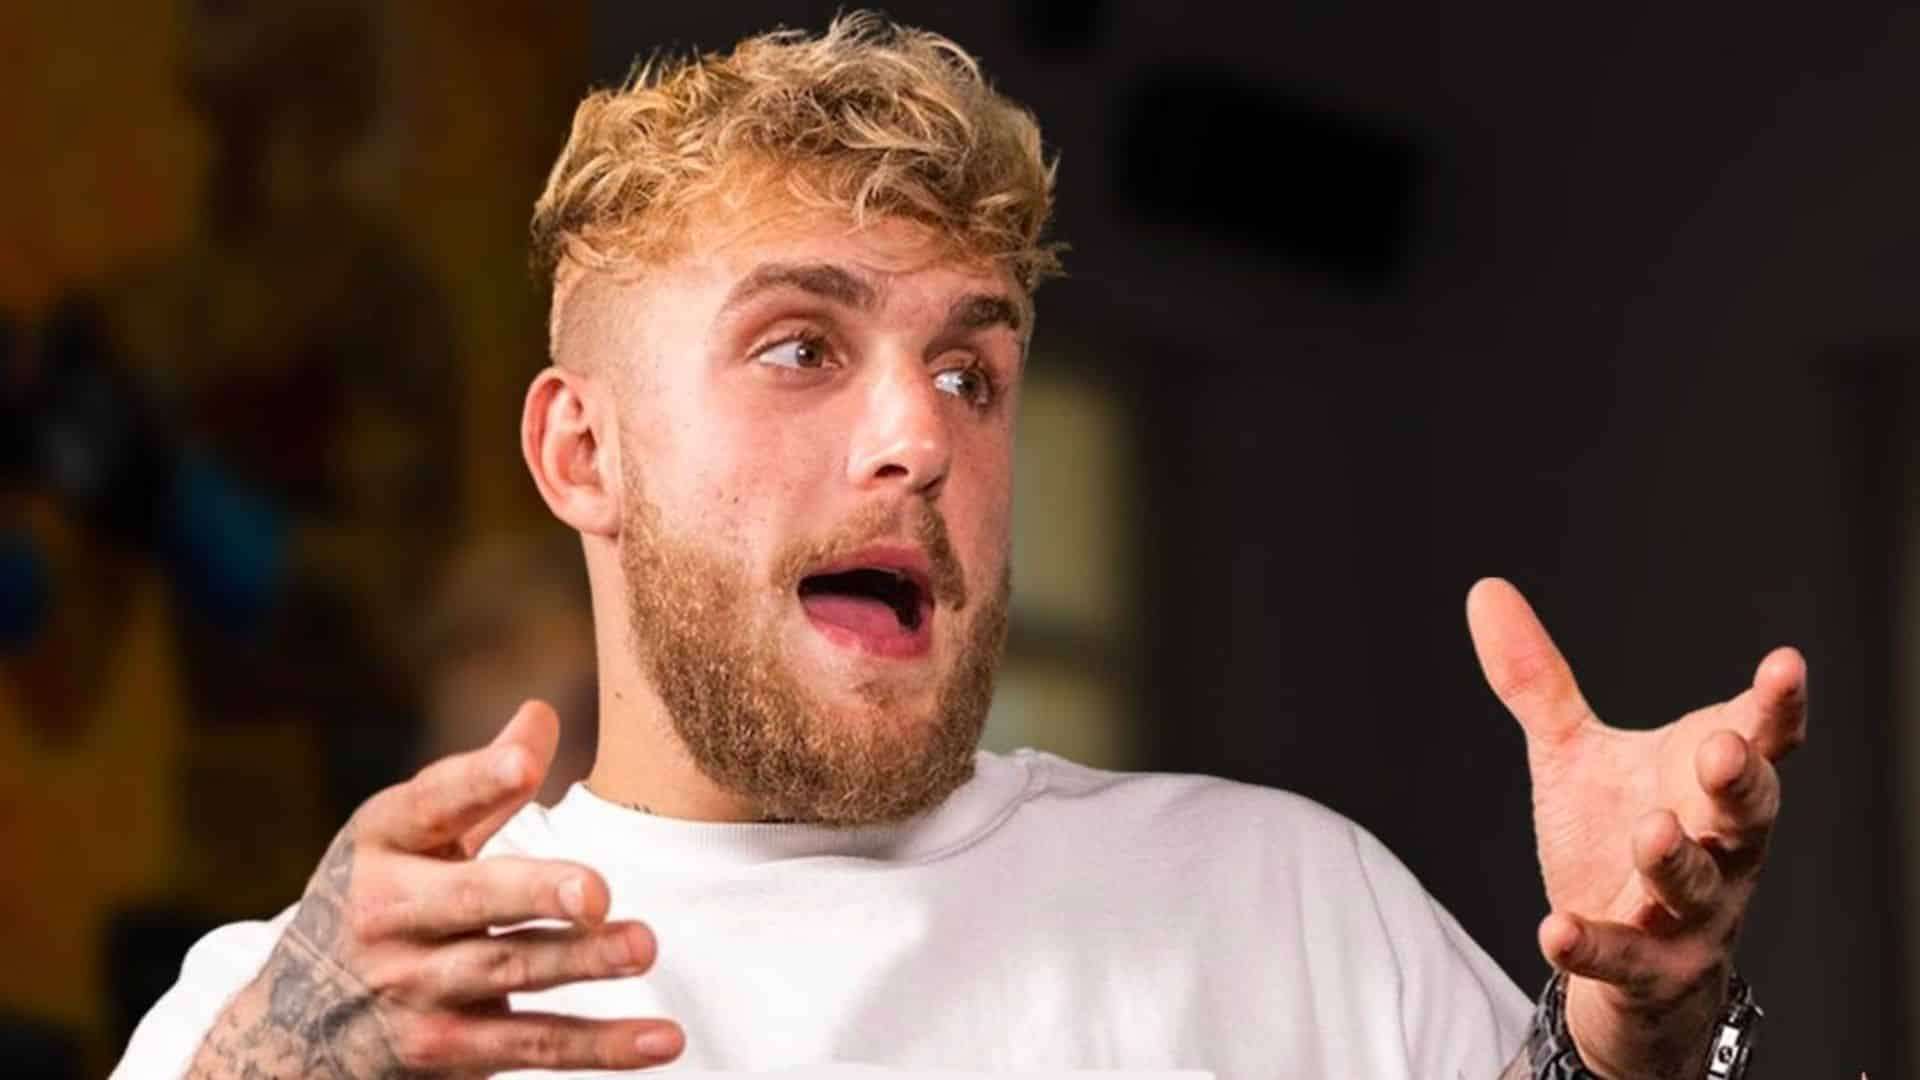 Jake Paul talking to camera with hands raised